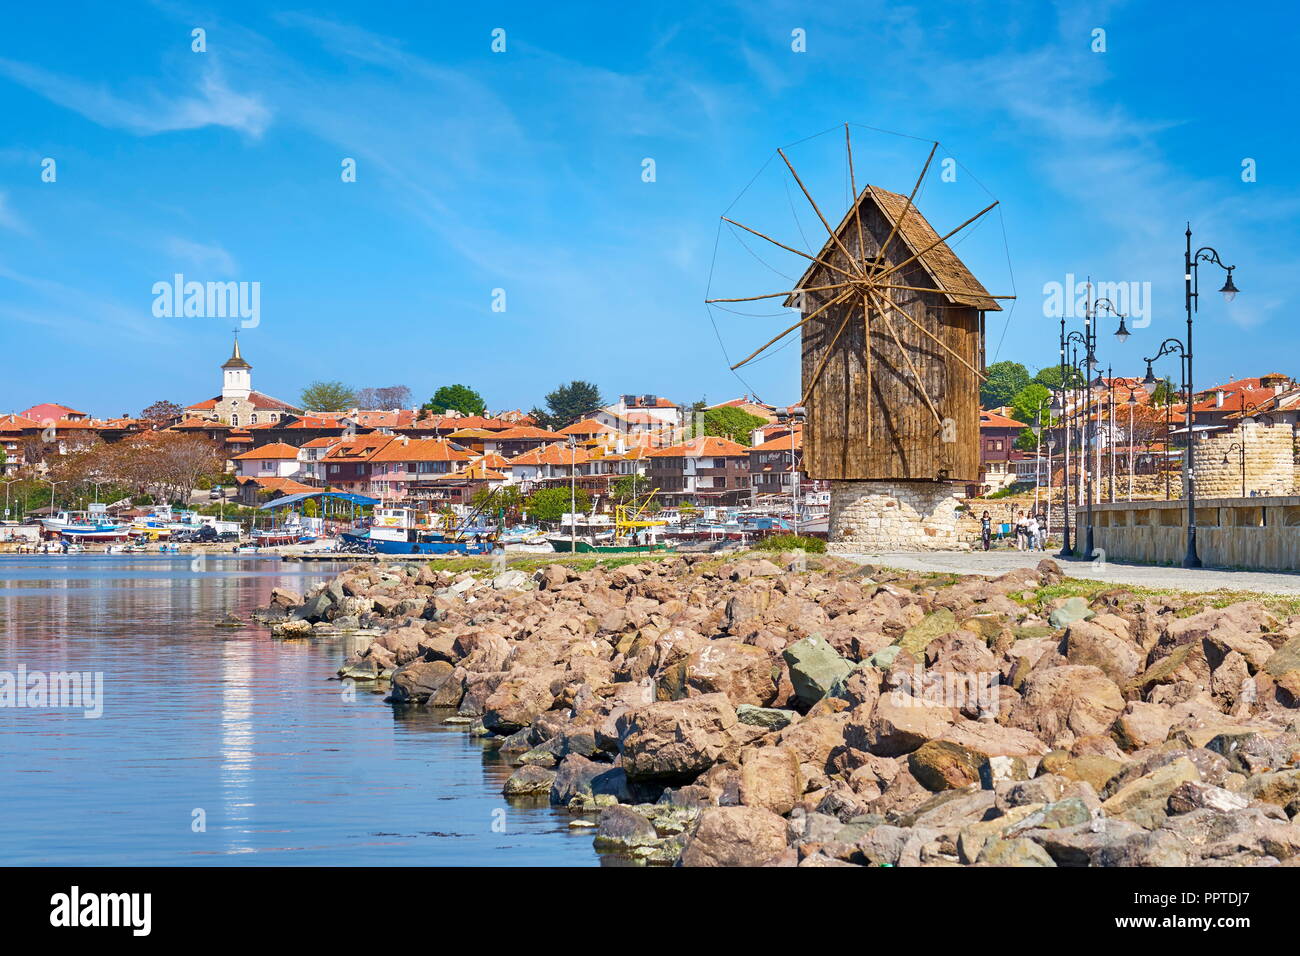 Wooden windmill, old town Nessebar, Bulgaria Stock Photo